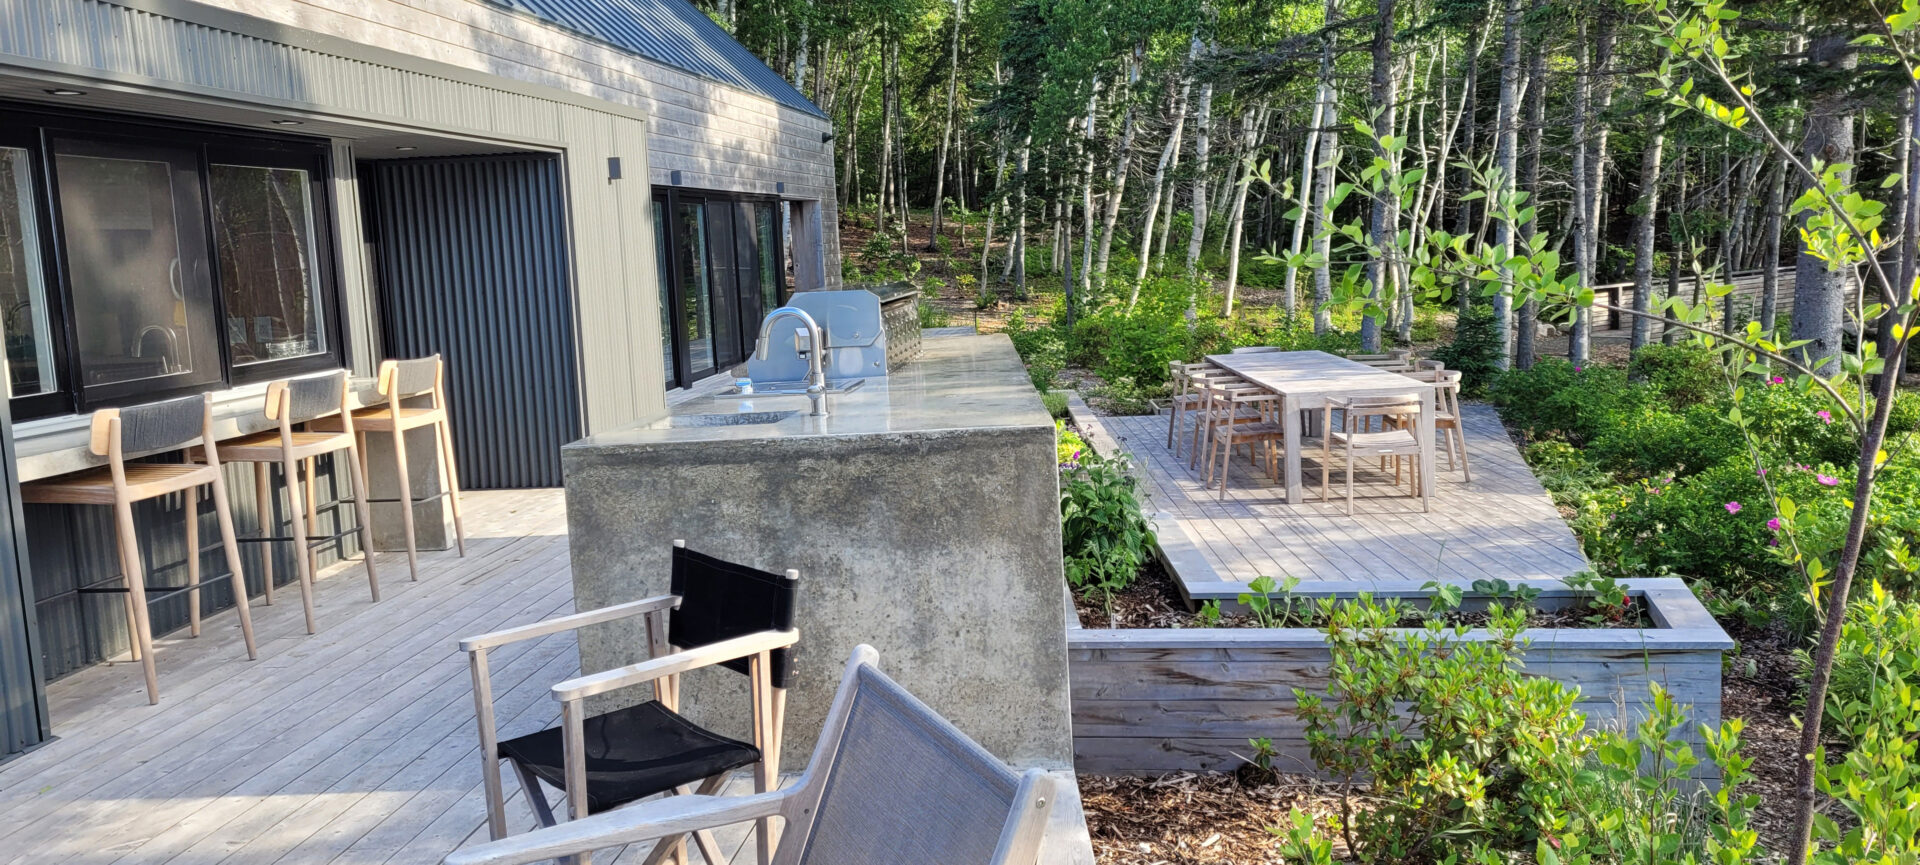 Outdoor dining at Cabot Trail Retreat